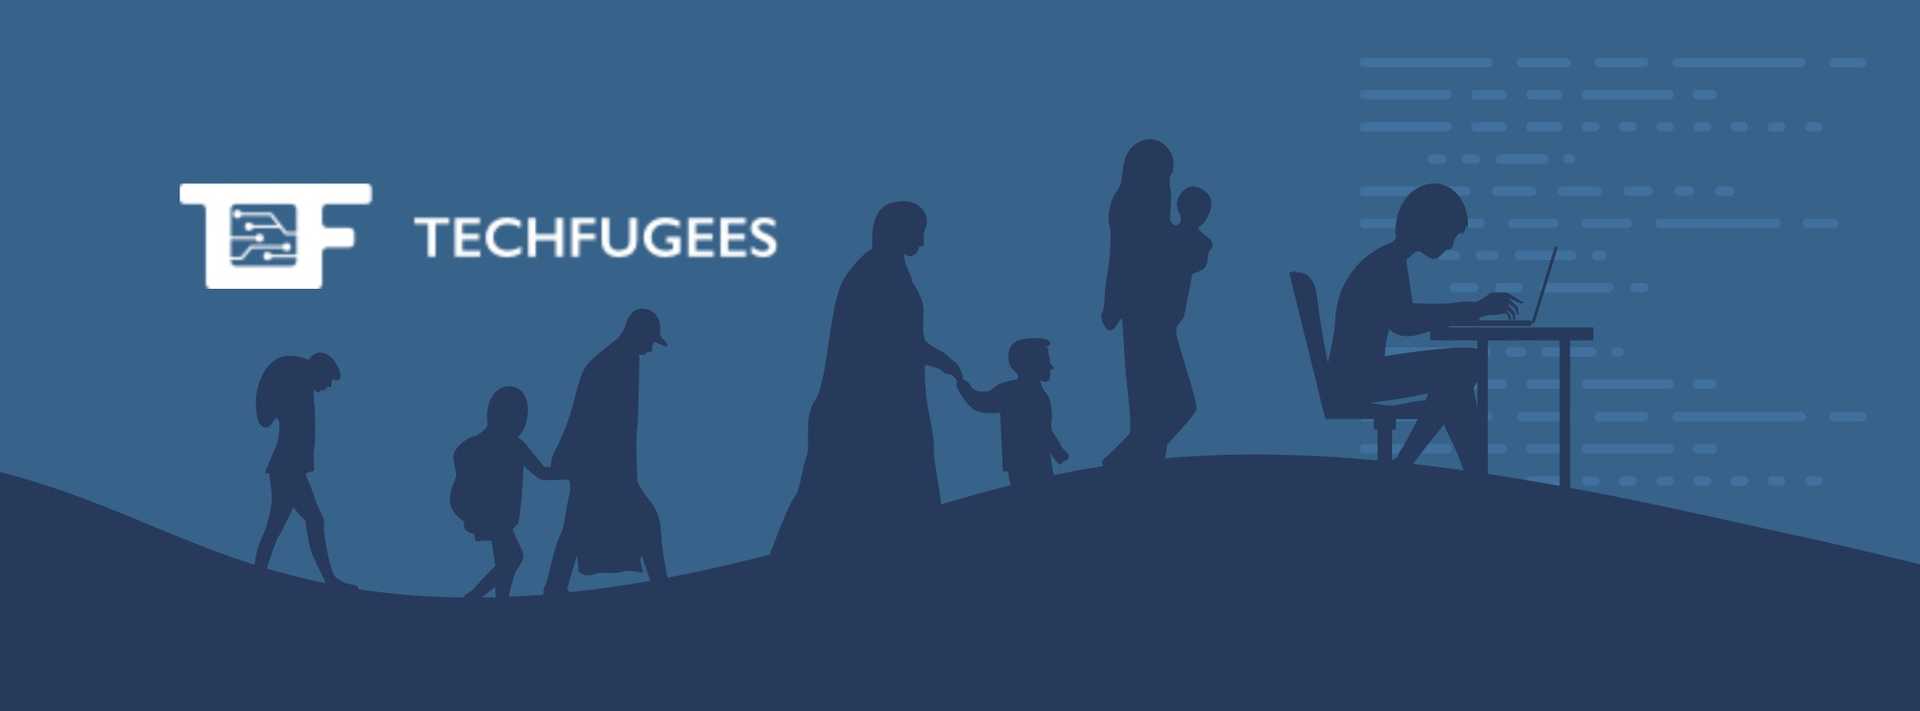 Techfugees - supporting displaced people